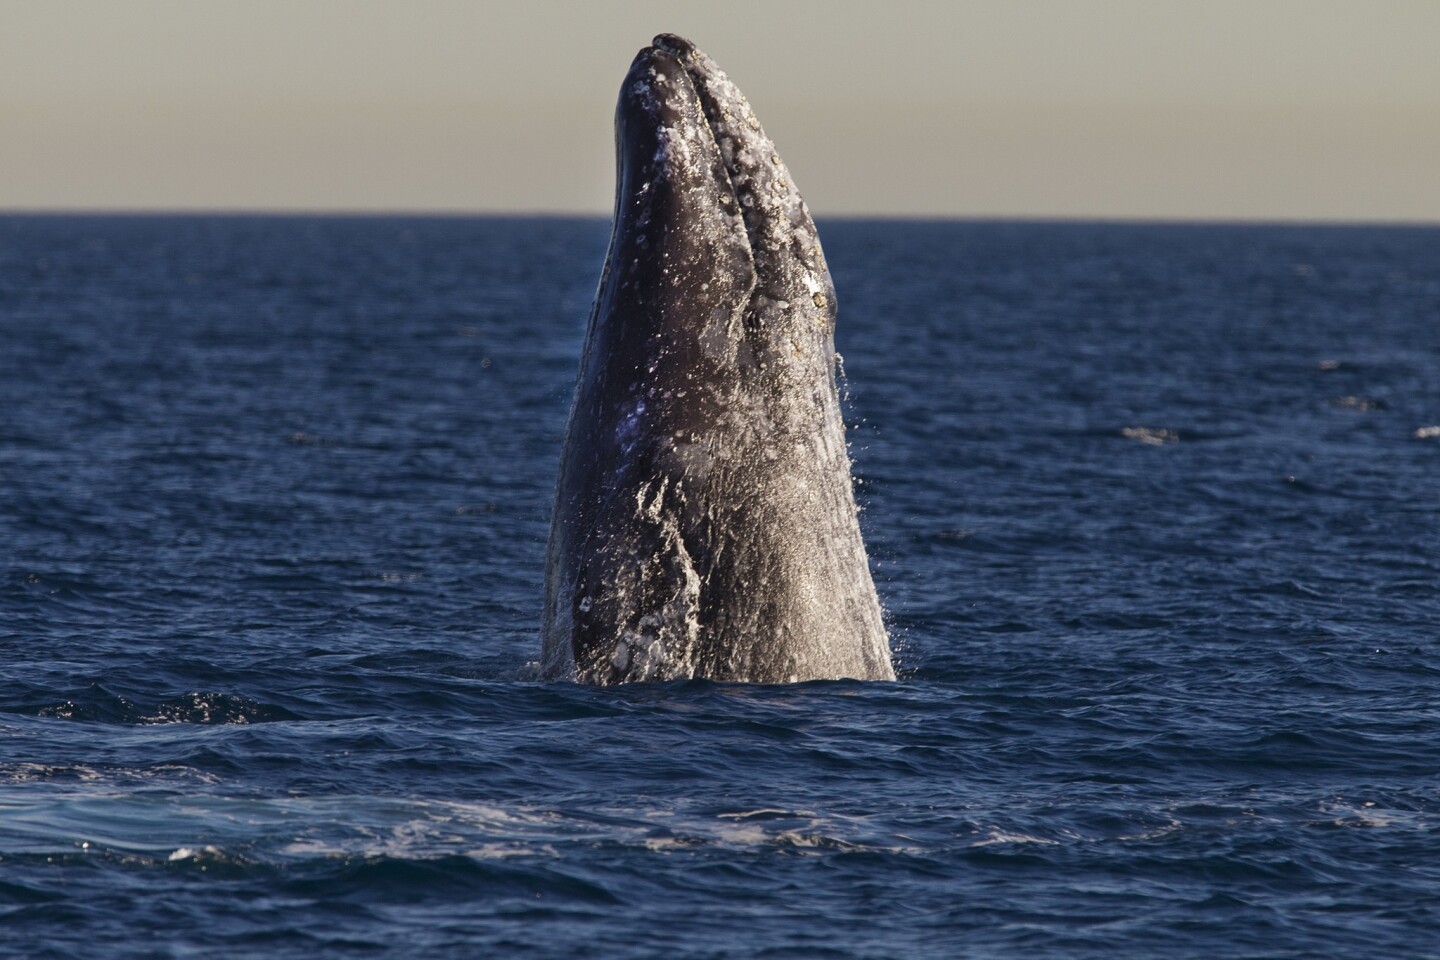 A gray whale appears off the coast of Long Beach on Monday. The number of gray whales spotted migrating south along the Southern California coast in December jumped to 364 from 182 during the same time period in 2012, causing observers to wonder if the once endangered species is experiencing a boom in population or if its migration patterns are shifting.